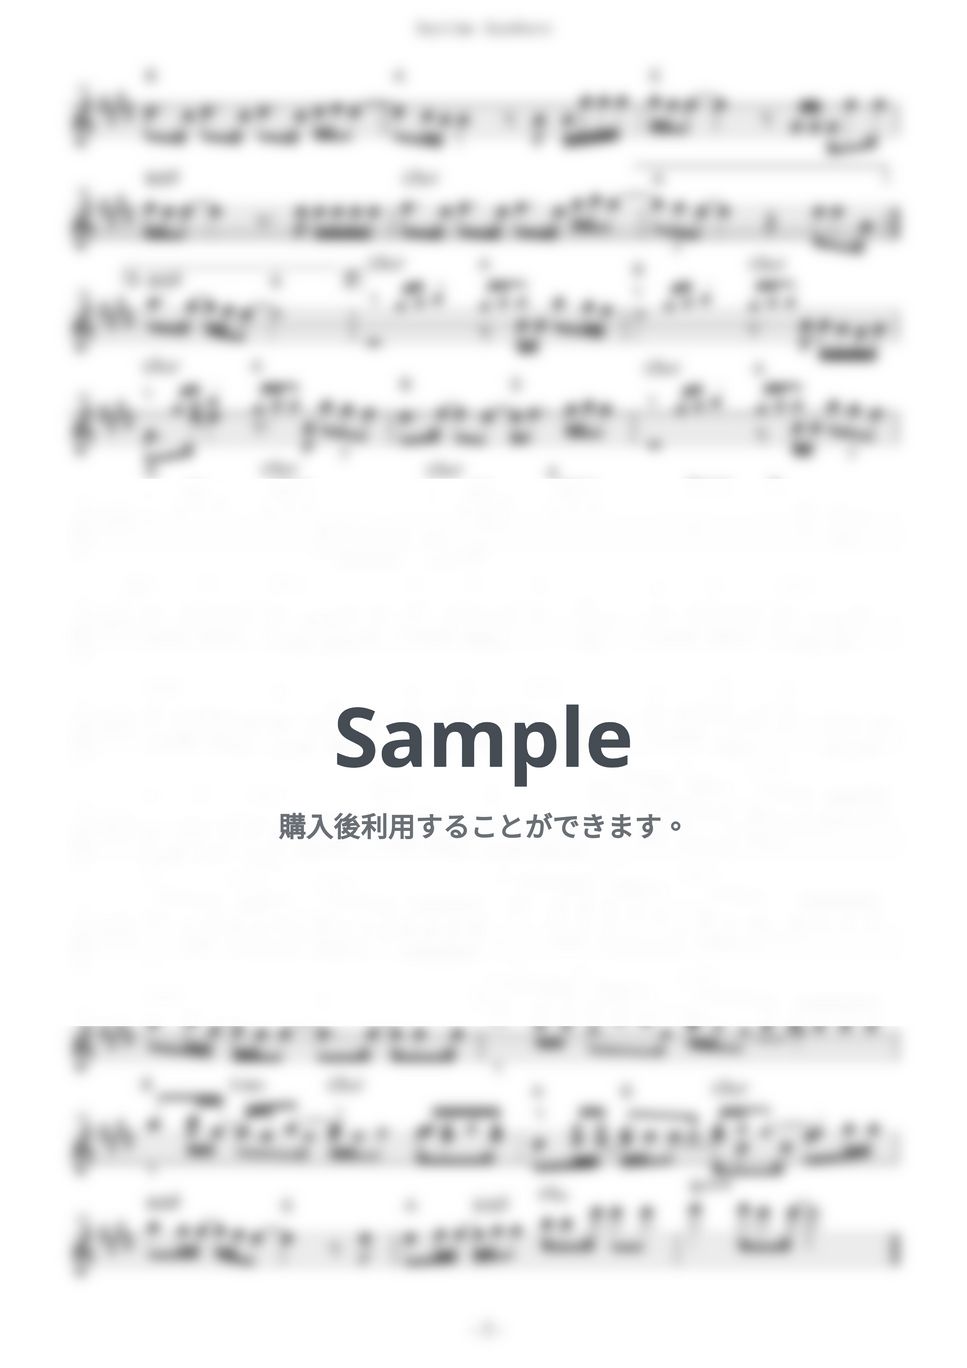 milet - Anytime Anywhere (『葬送のフリーレン』 / in C) by muta-sax